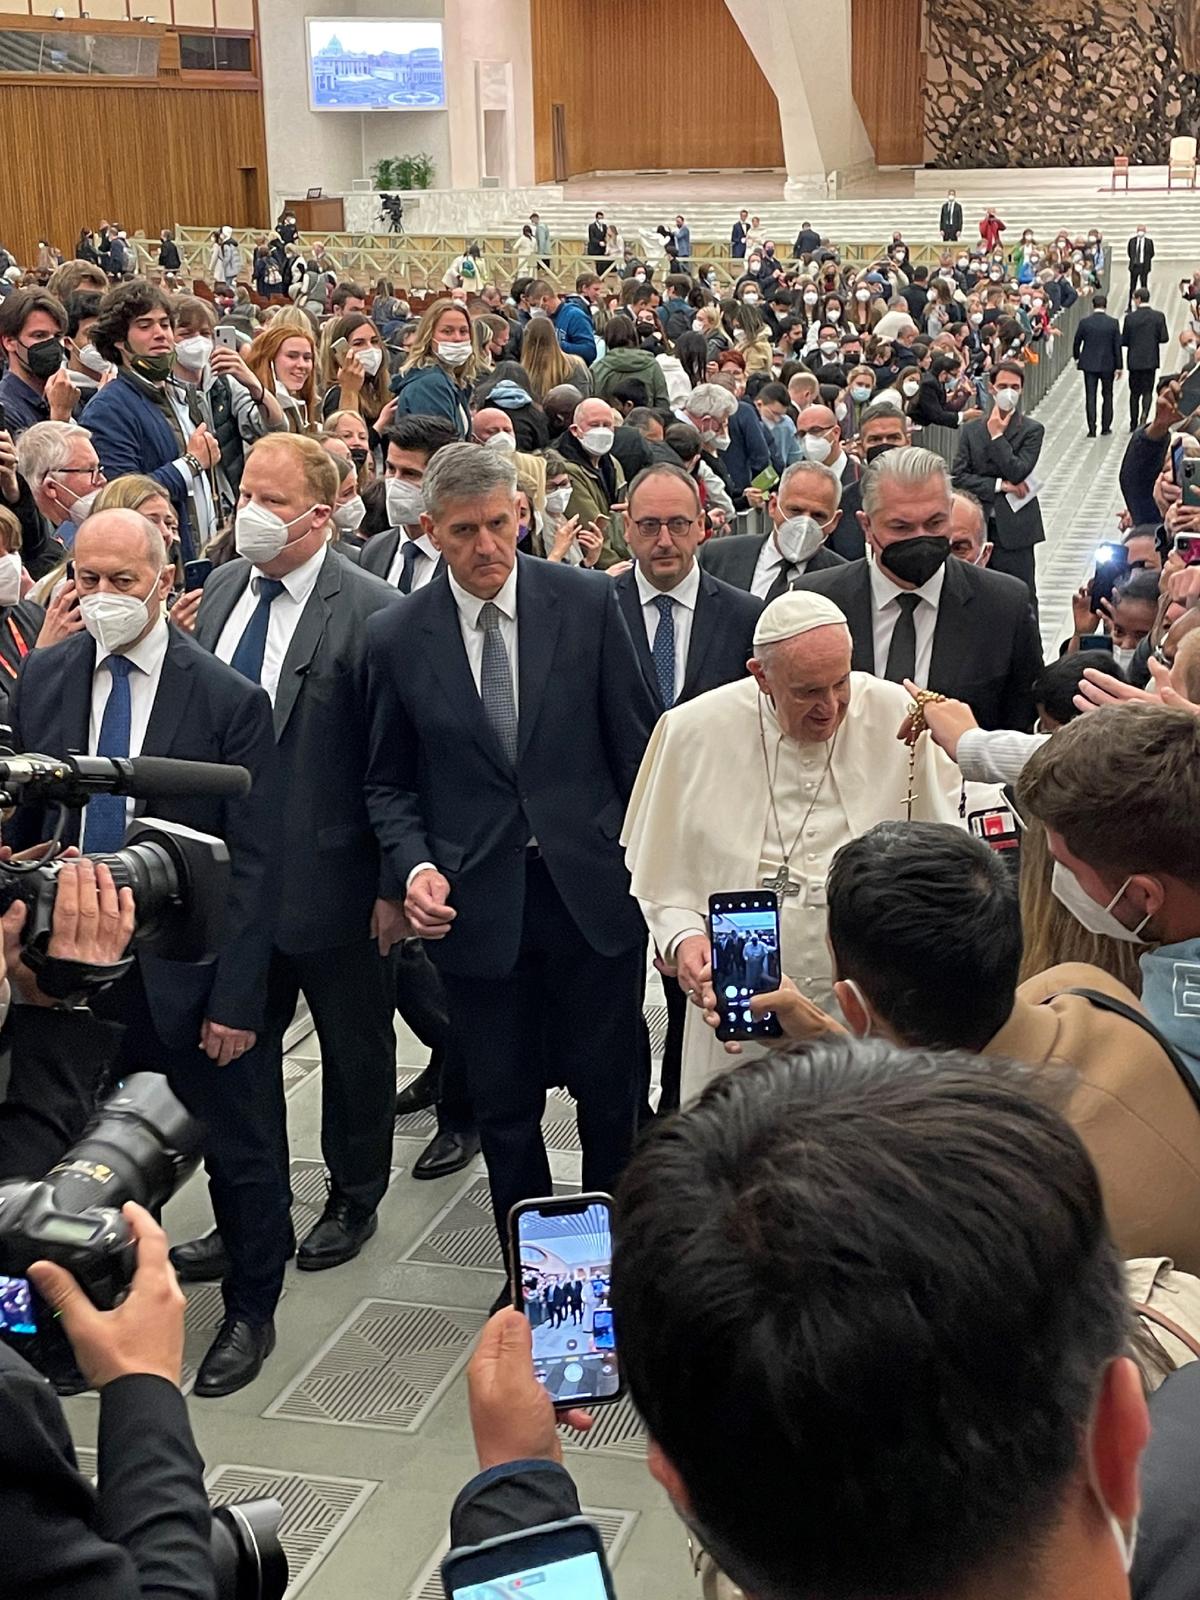 Pope Francis walks up the center aisle to greet the faithful at a Wednesday audience in the Vatican. (Photo courtesy of David Frederikson)